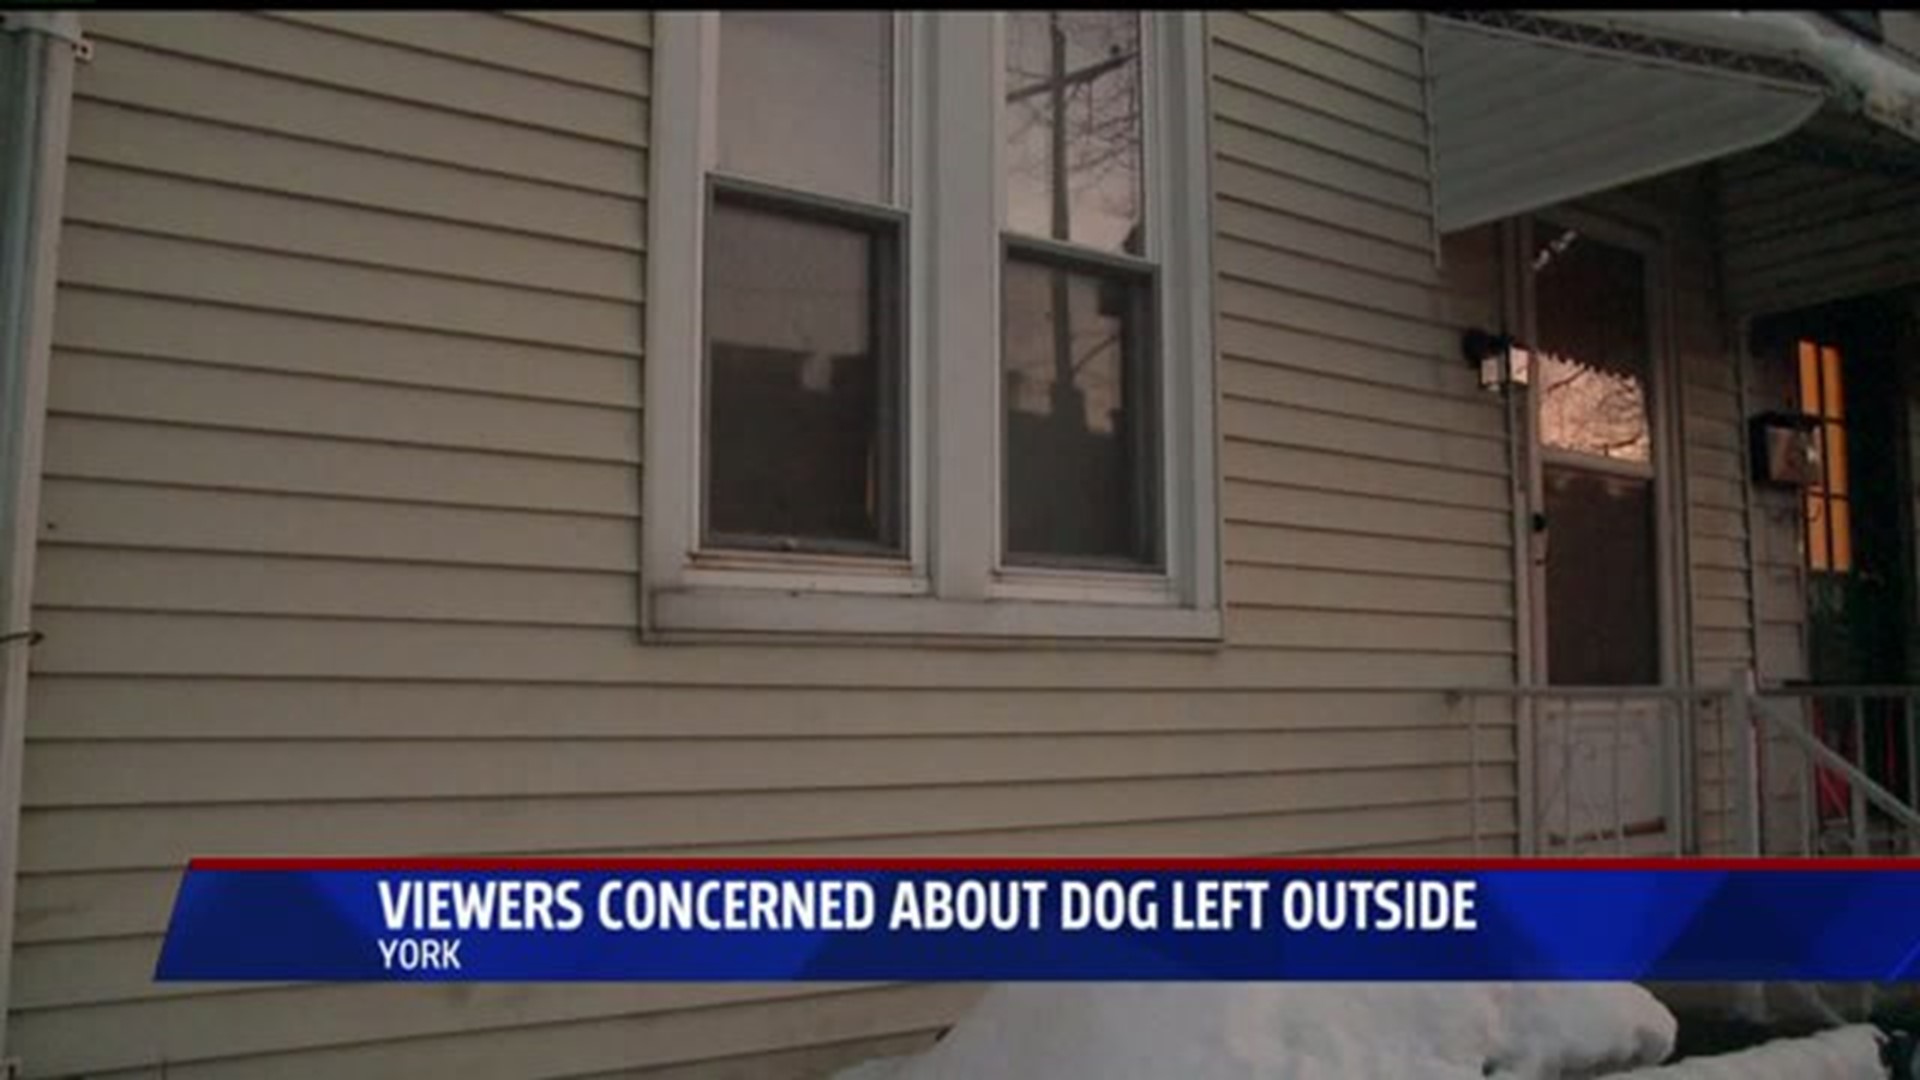 Dog outside in cold raises public concern